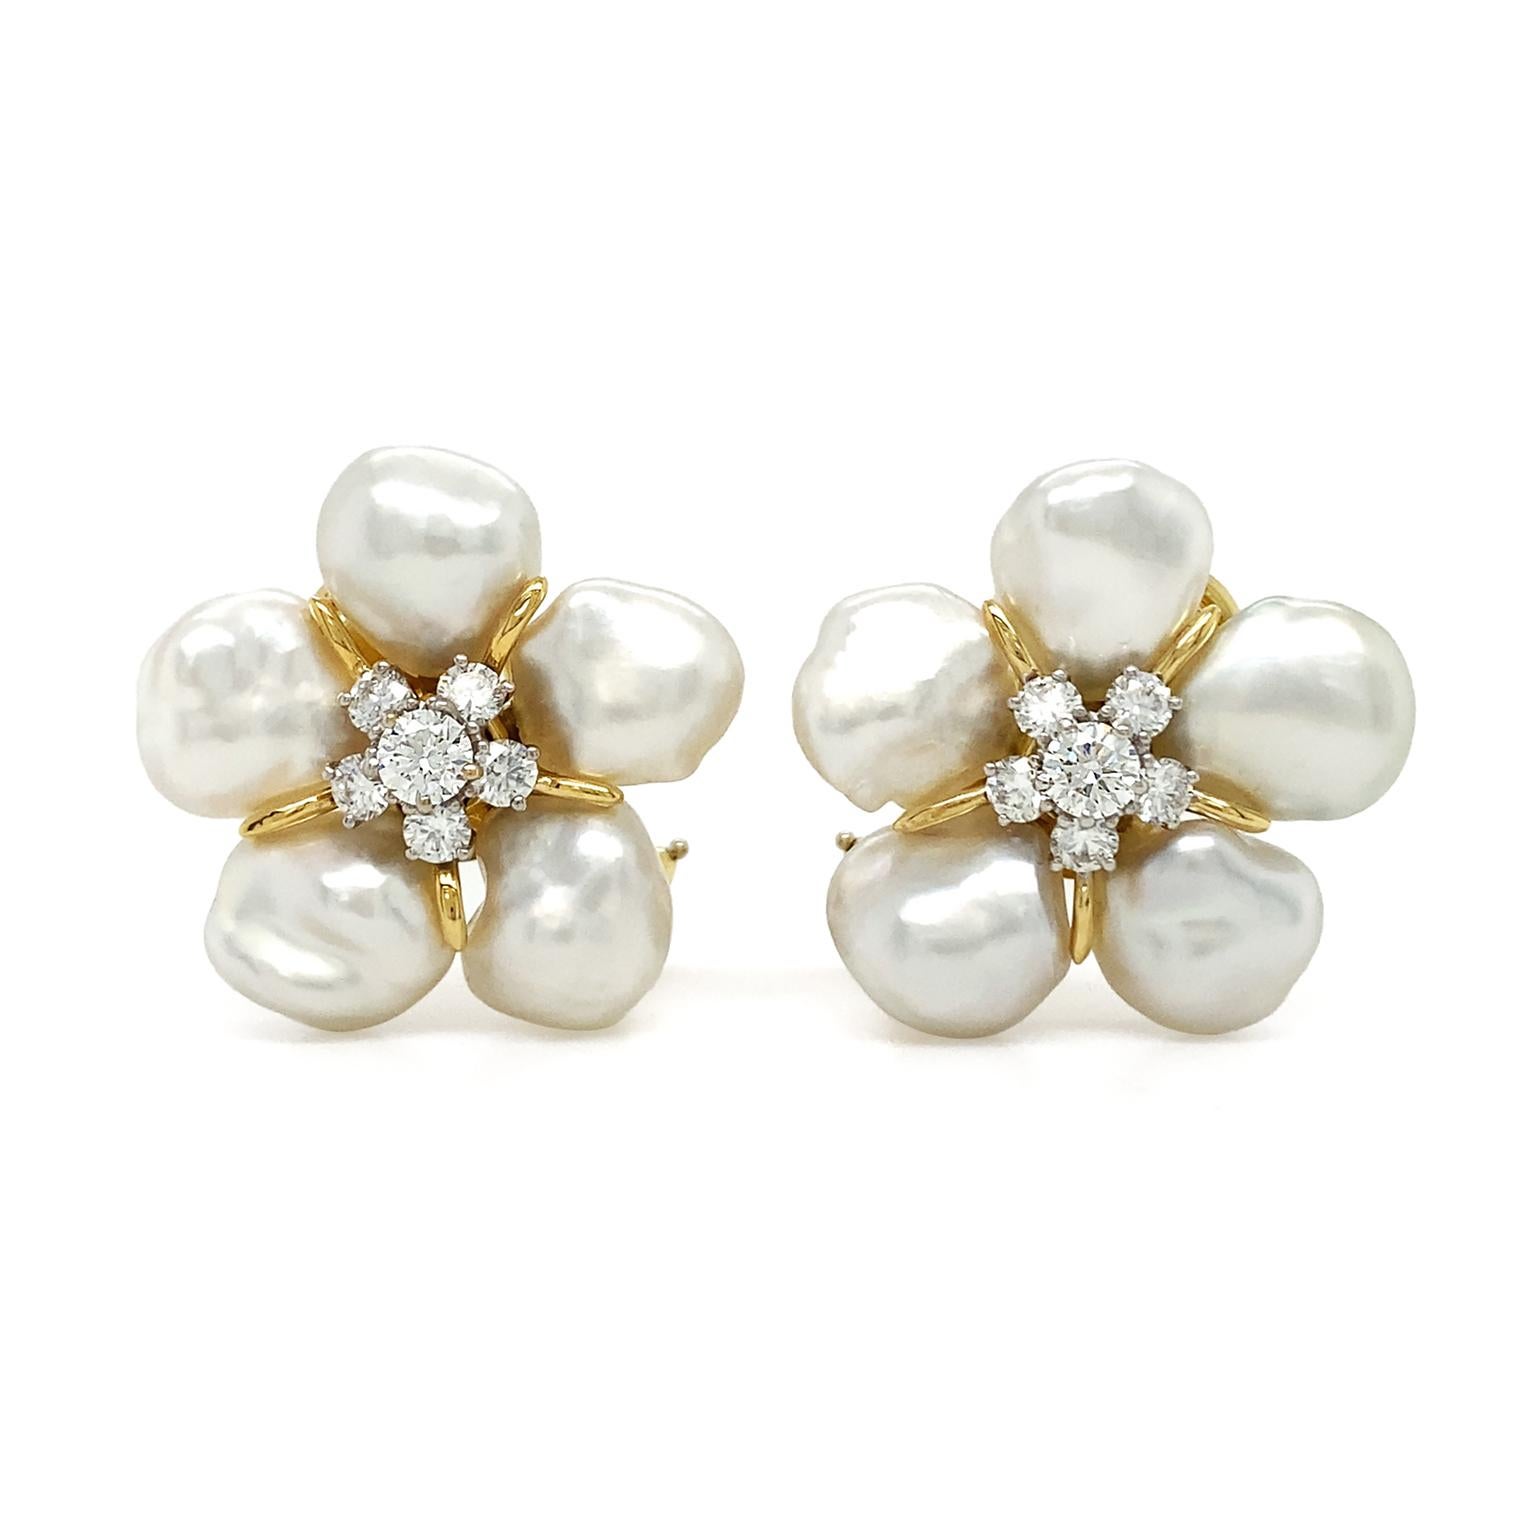 Botanical motifs are visualized by pearls and diamonds. Five South Sea keshi pearls, prized for their unique creation and nacre bodies, are arranged in a circle. The 18k yellow gold settings allow a glimpse of gold to shine in between the pearls. In